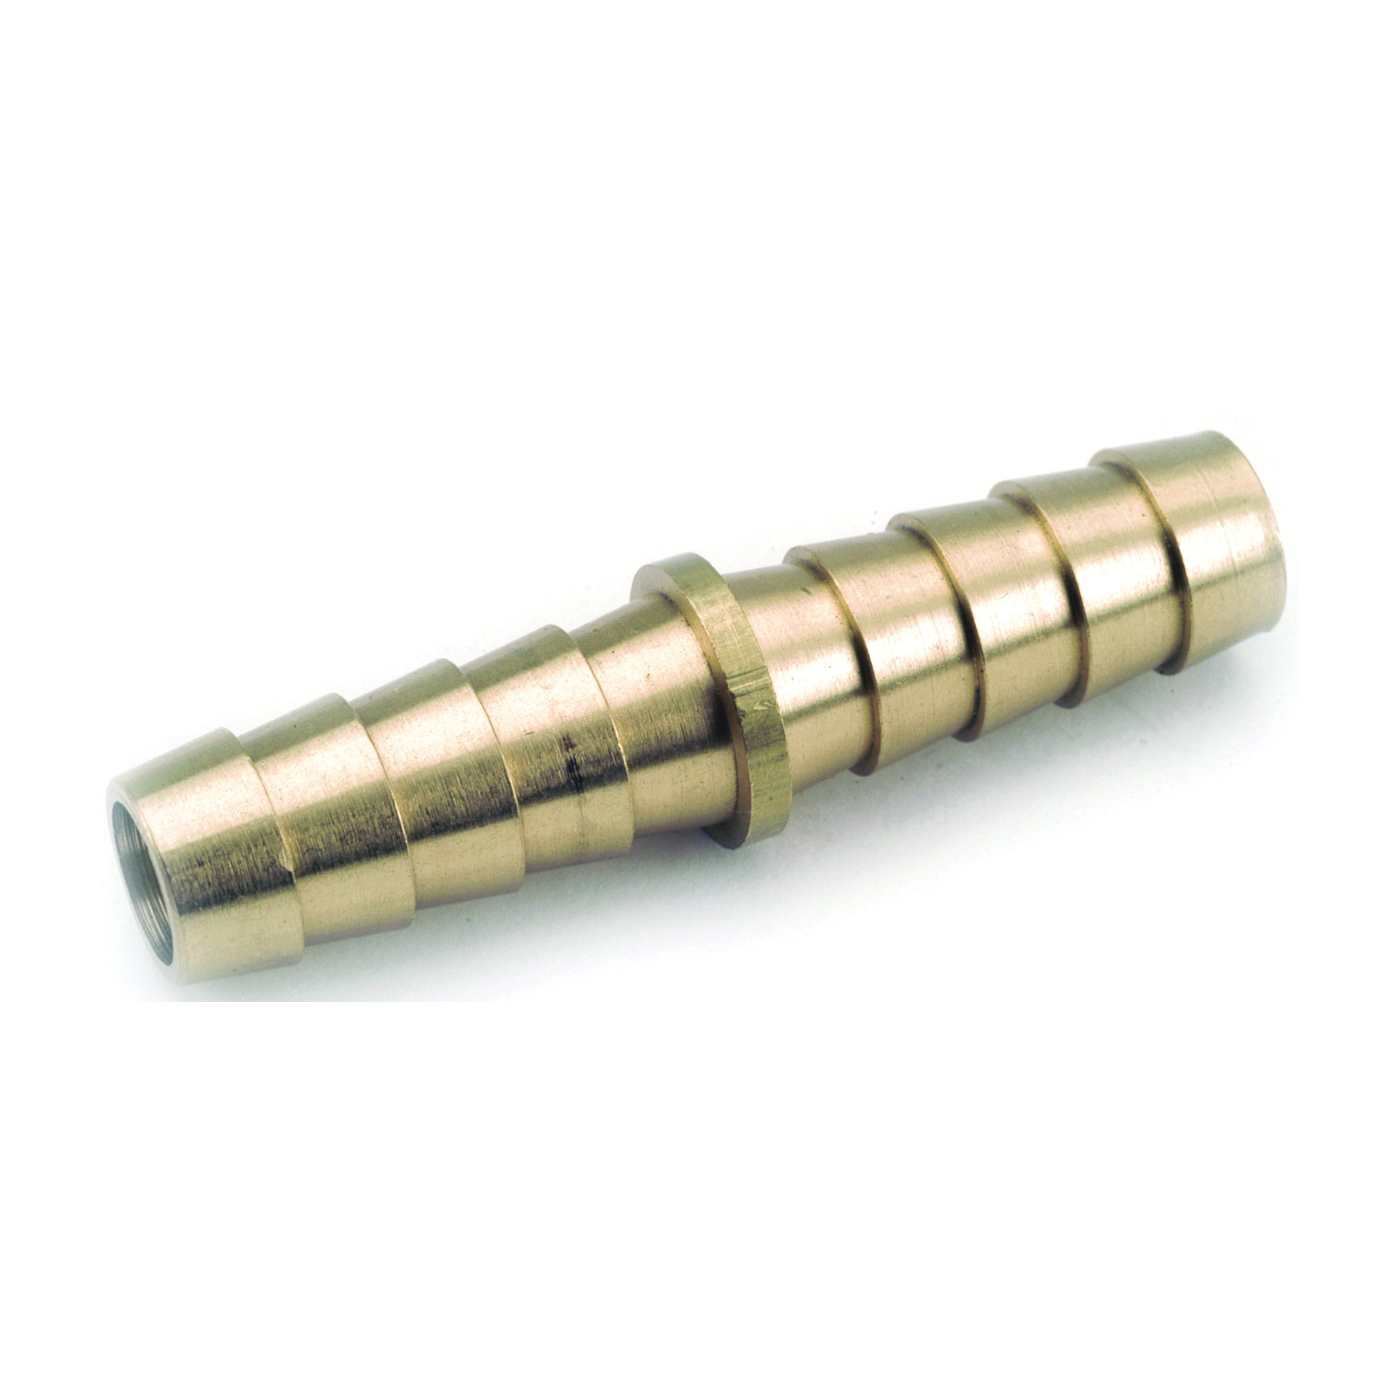 LF 7129S Series 757014-05 Hose Fitting, 5/16 in, Barb, Brass